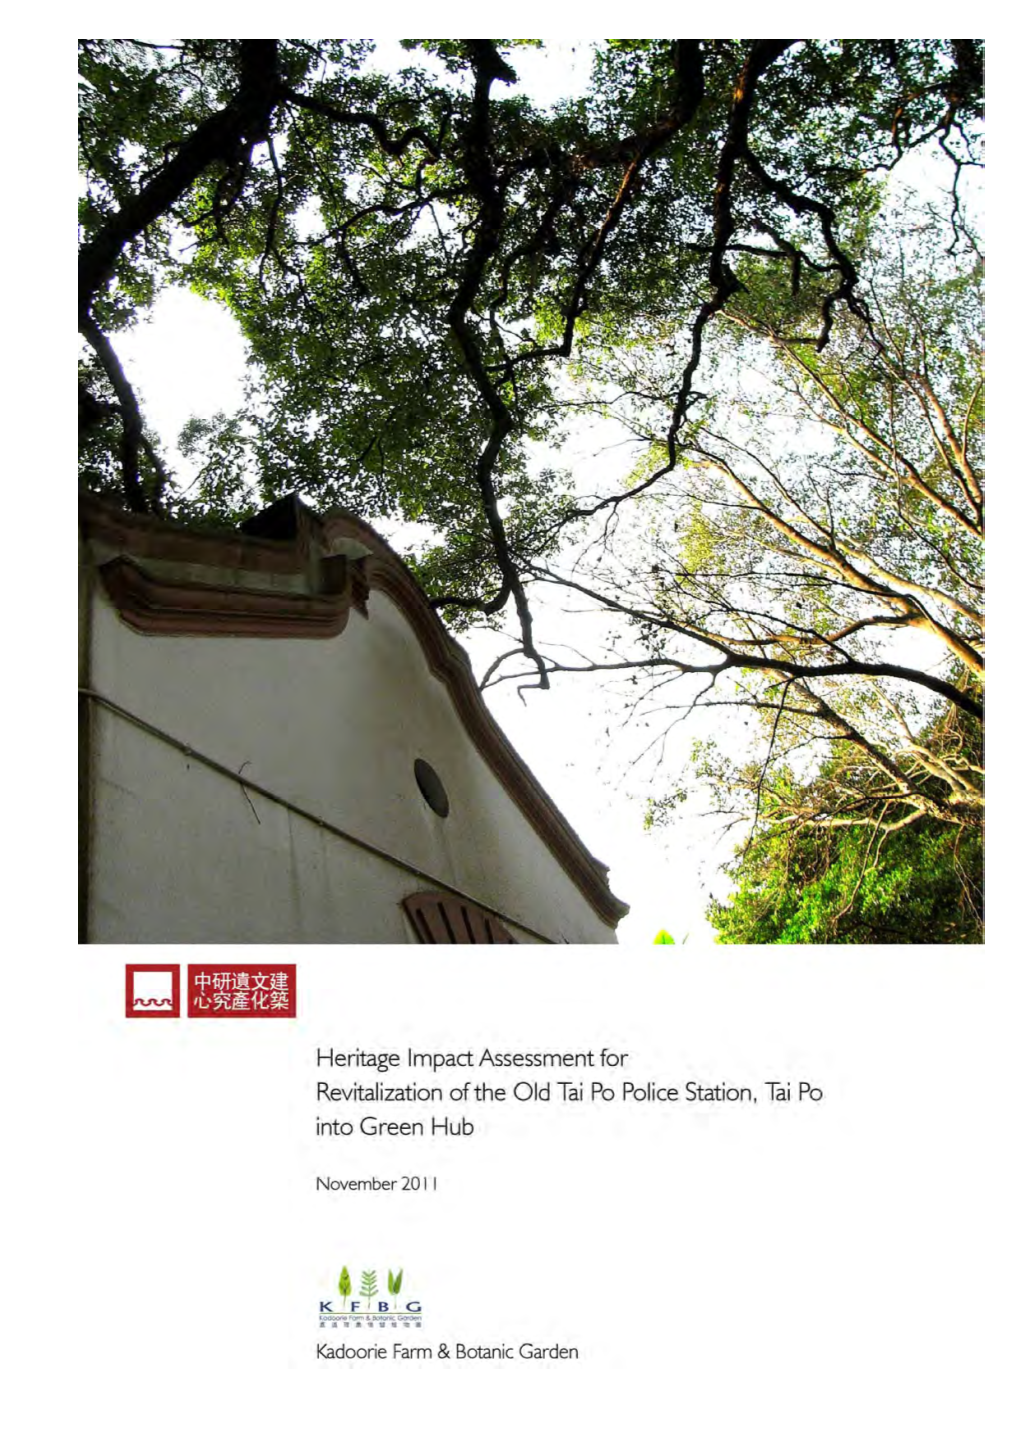 Heritage Impact Assessment of Old Tai Po Police Station